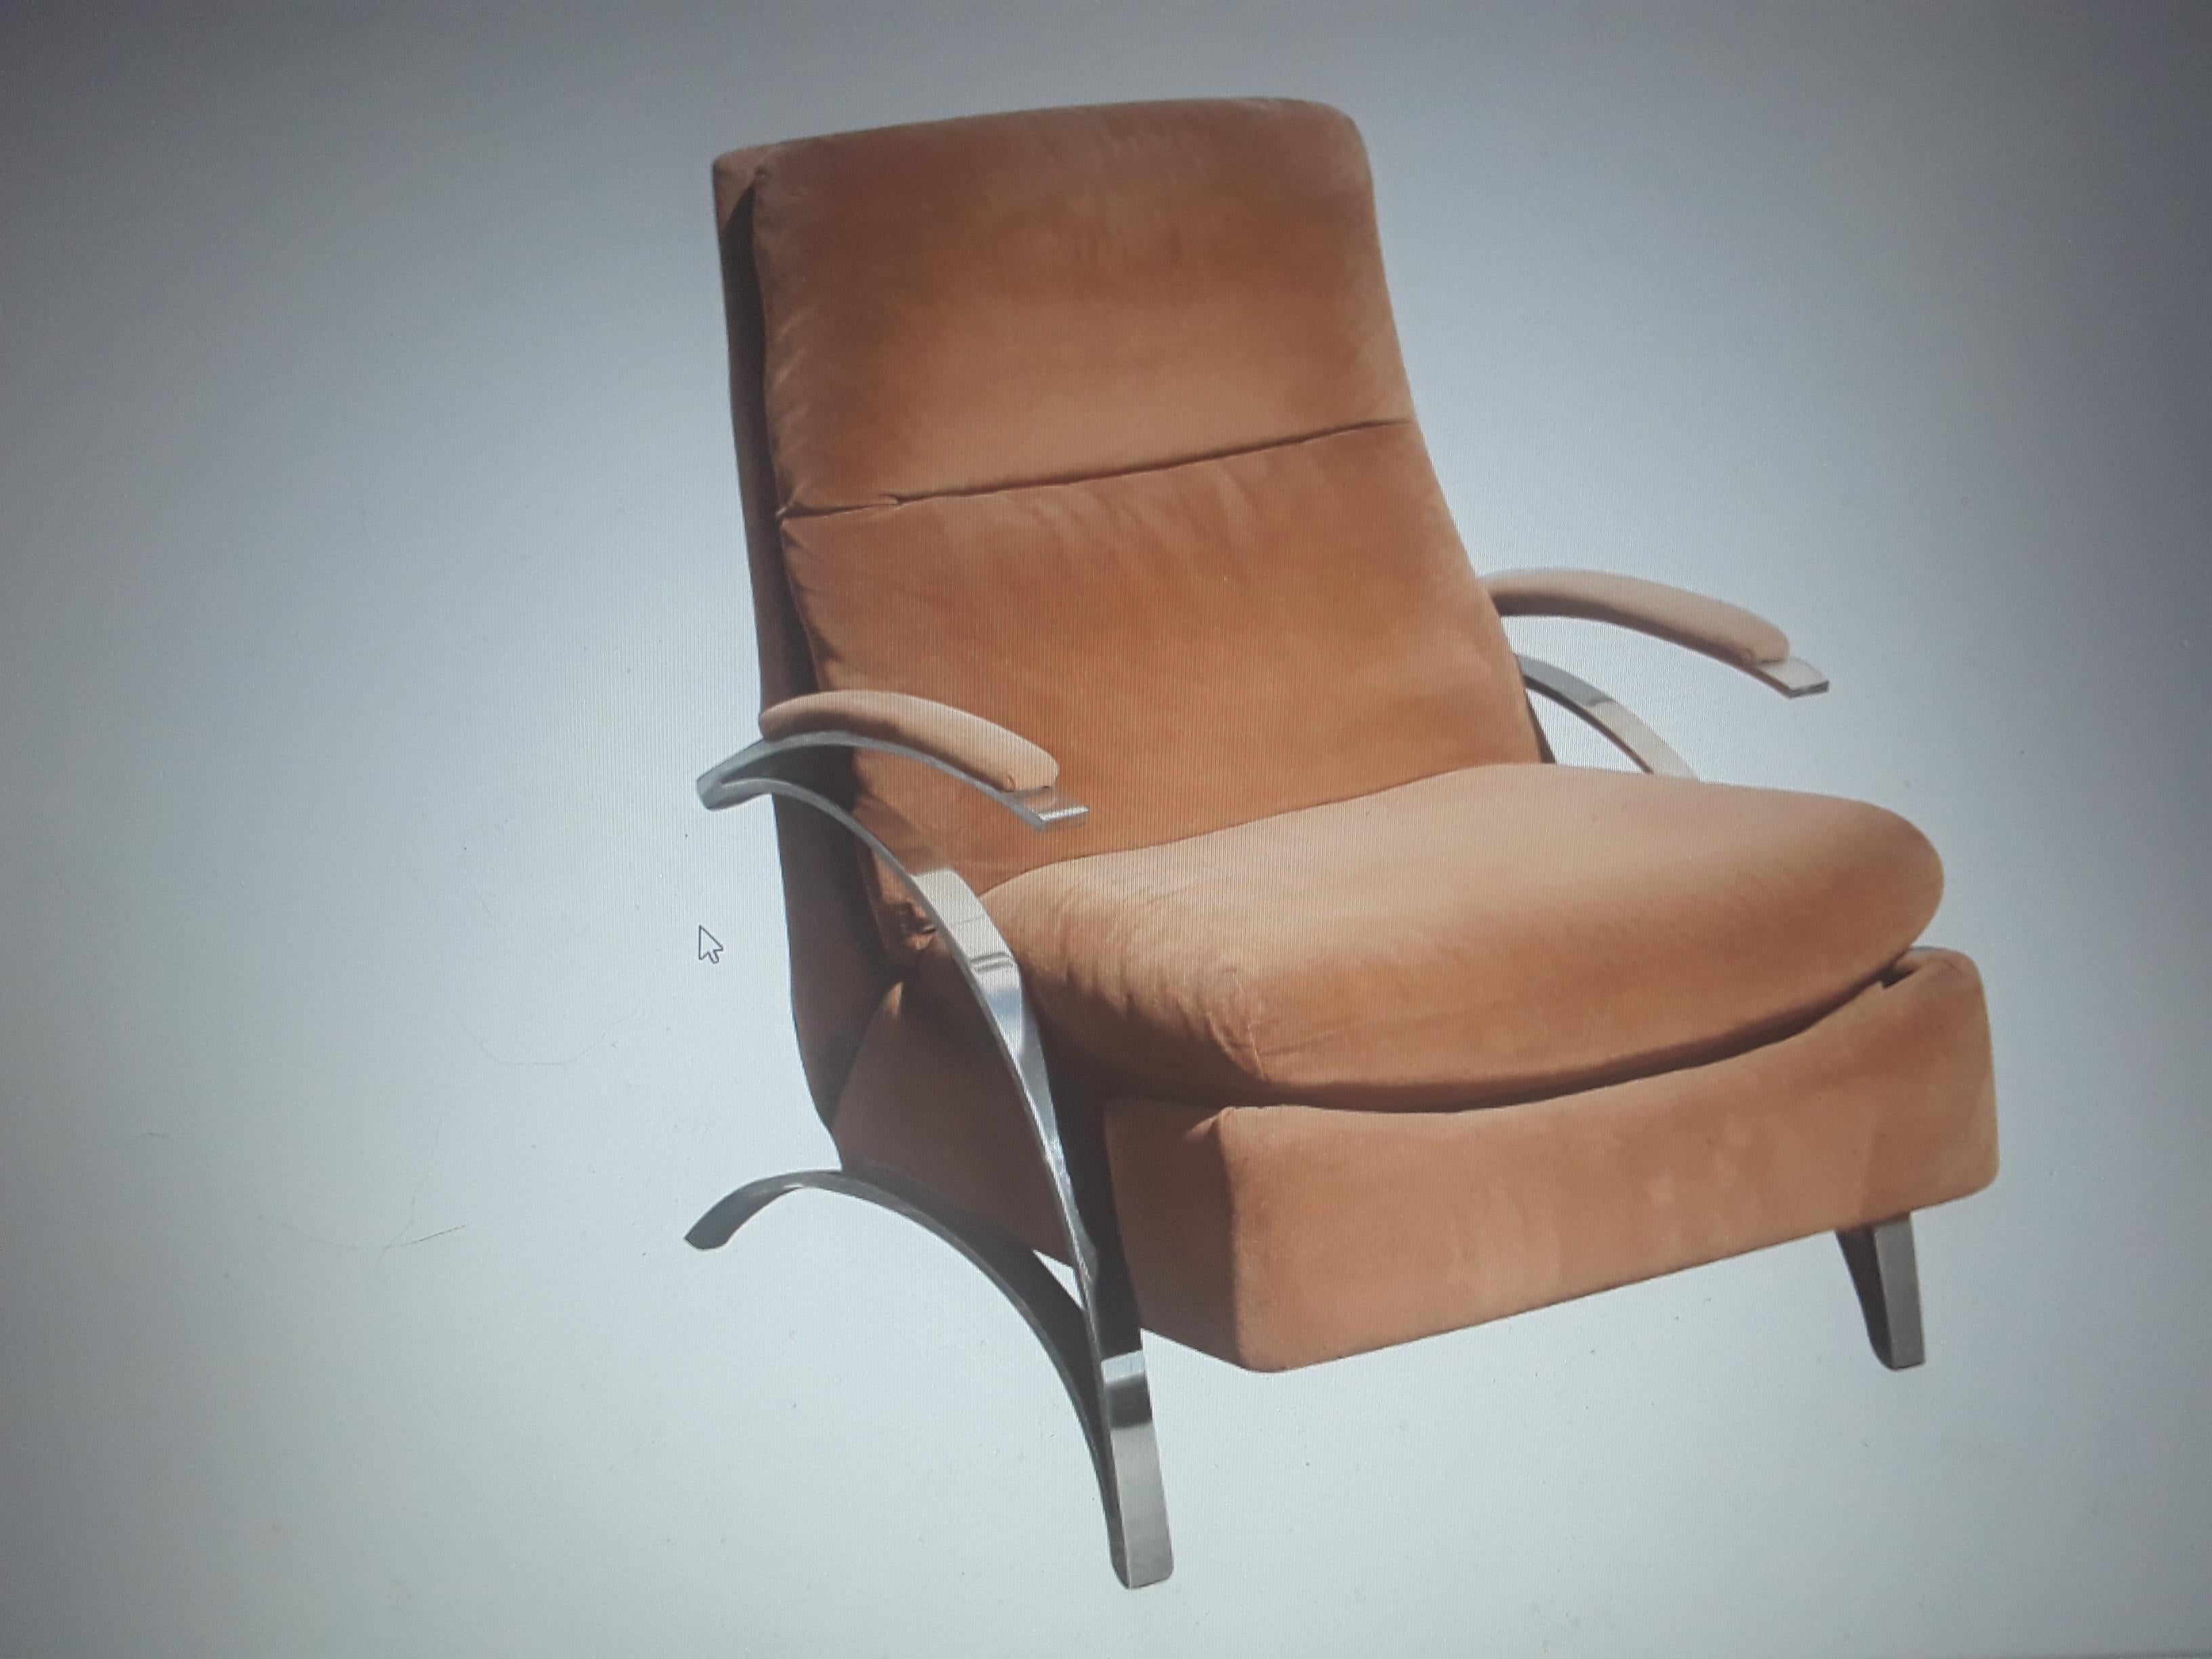 1970's Modern Plush Brown w/ Chrome Barcalounger Recliner/ Lounge Chair For Sale 11